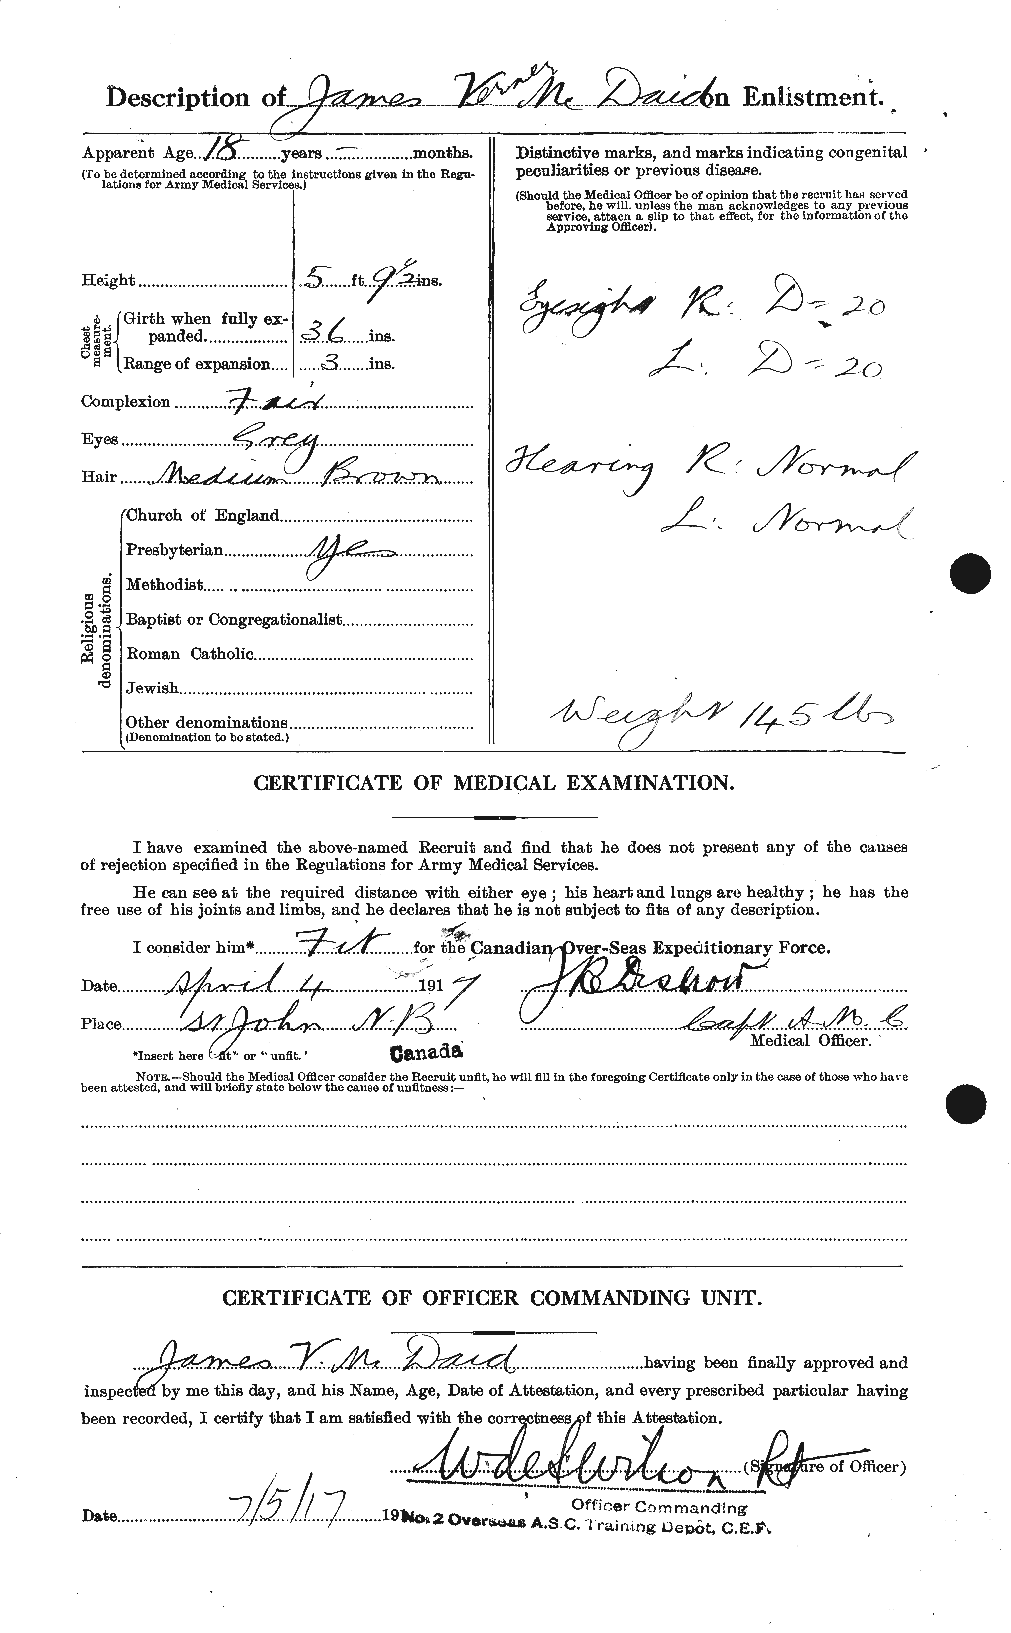 Personnel Records of the First World War - CEF 136226b